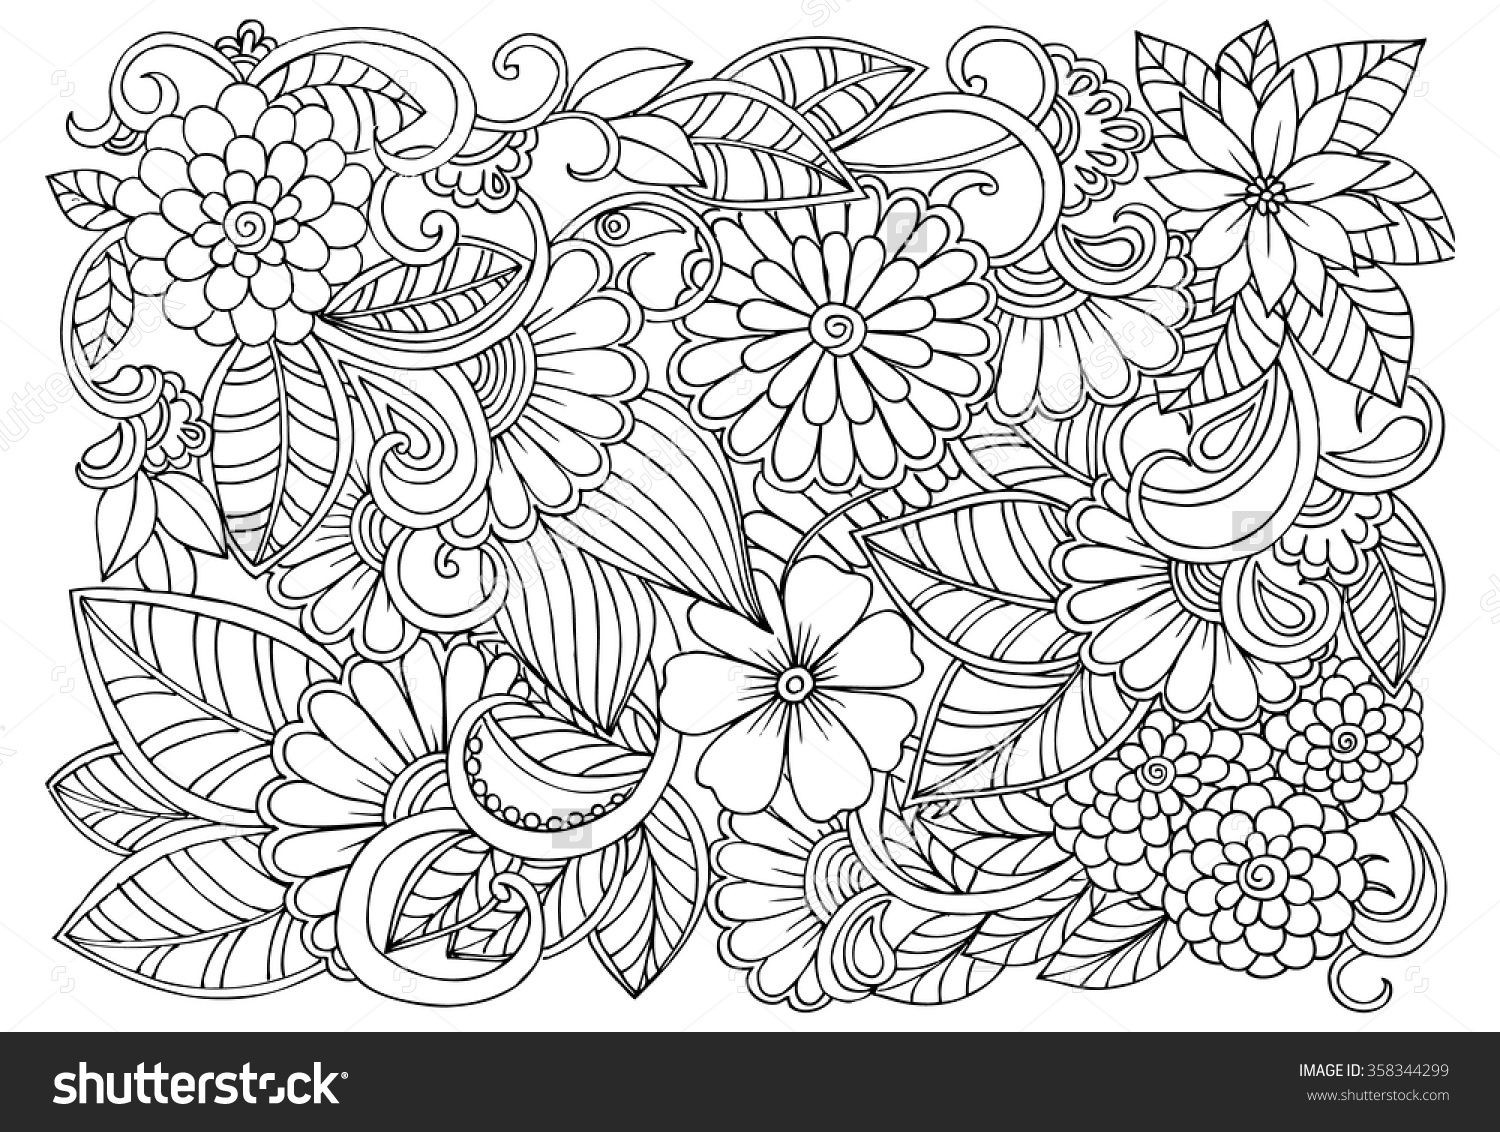 the-best-free-floral-coloring-page-images-download-from-334-free